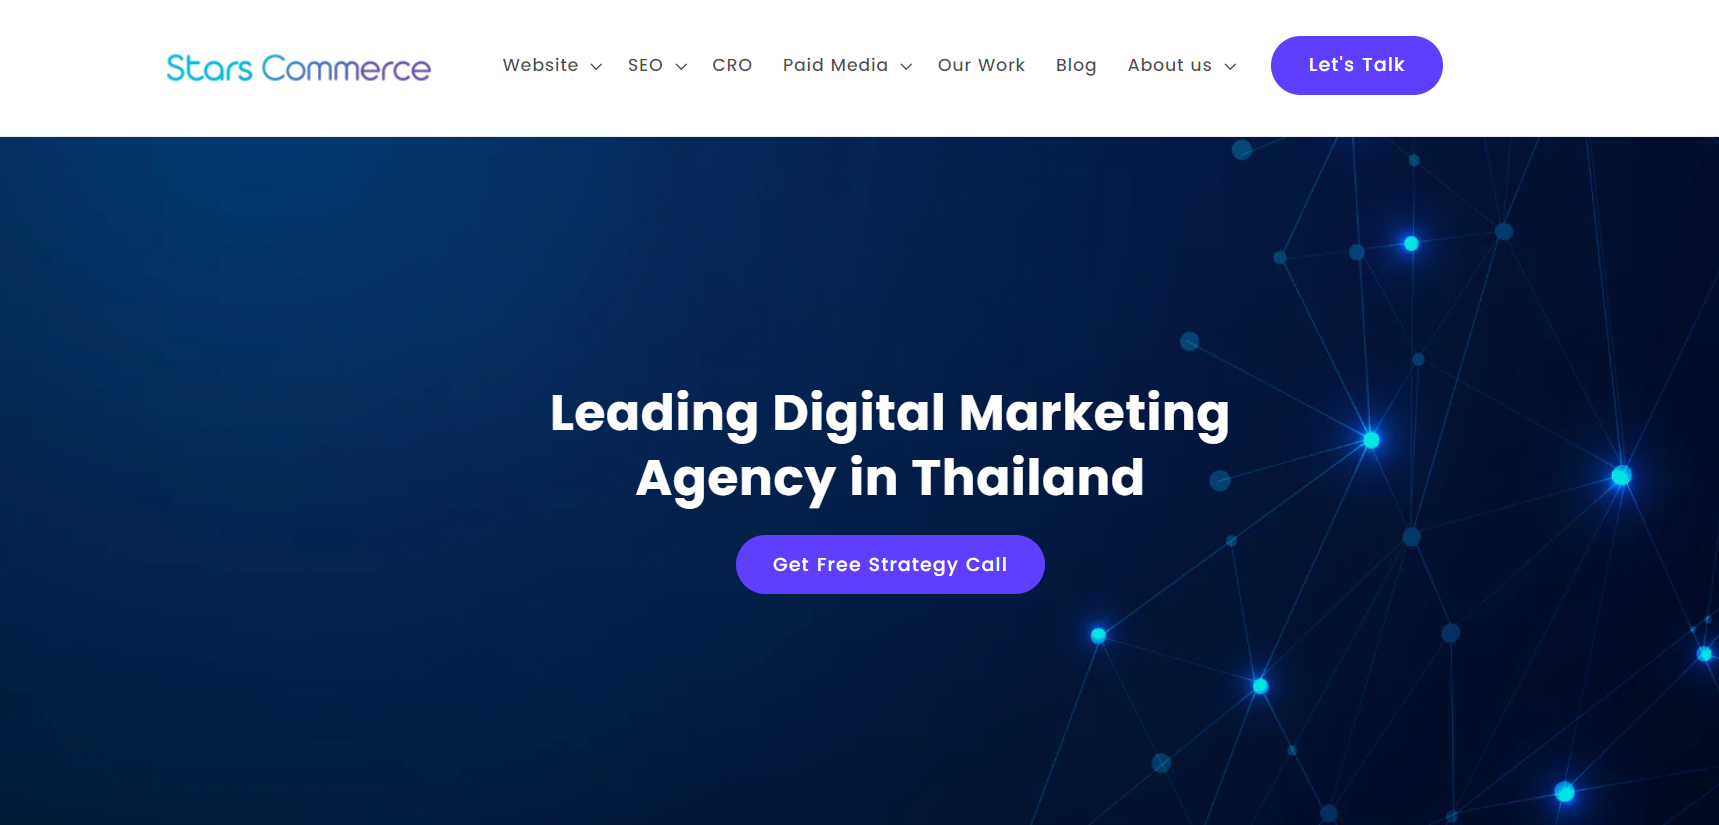 Stars Commerce: Elevating Digital Marketing and Web Design in Thailand